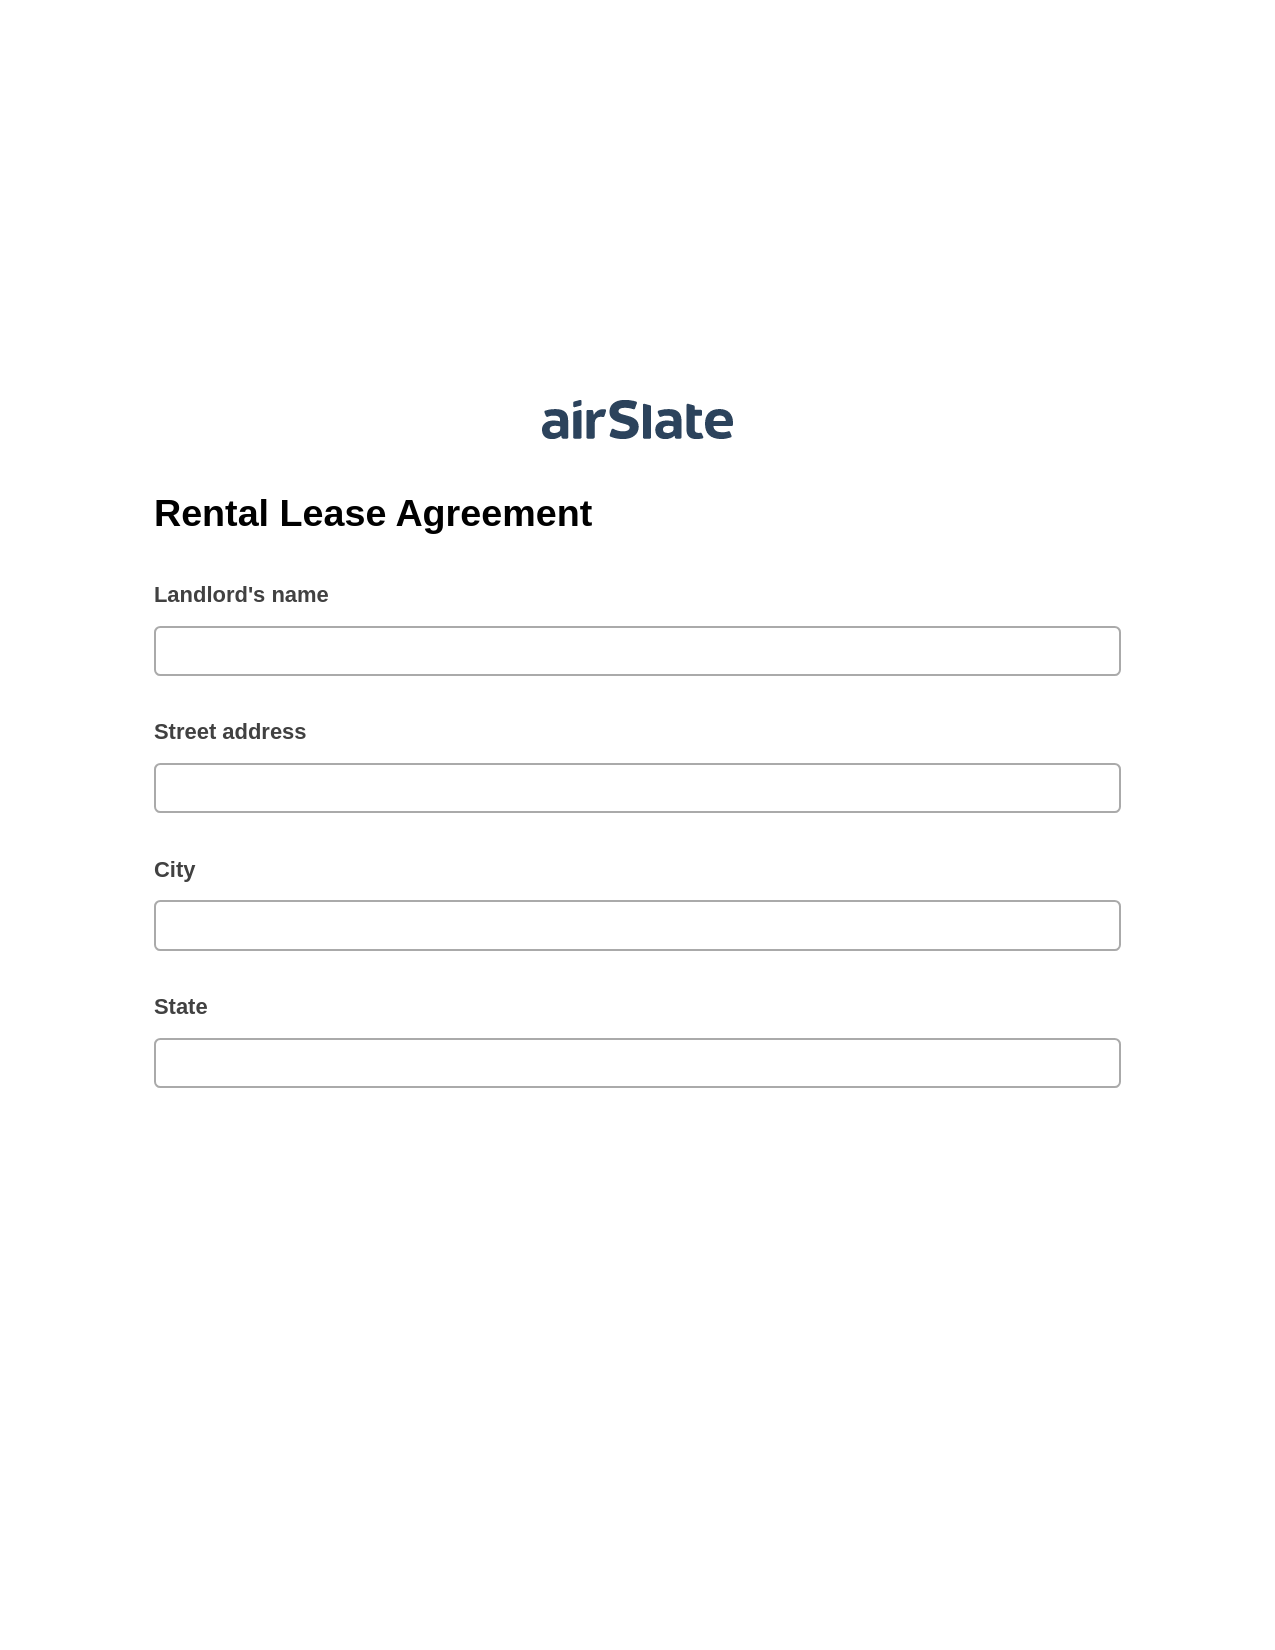 Rental Lease Agreement Pre-fill from another Slate Bot, Create NetSuite Records Bot, Google Drive Bot